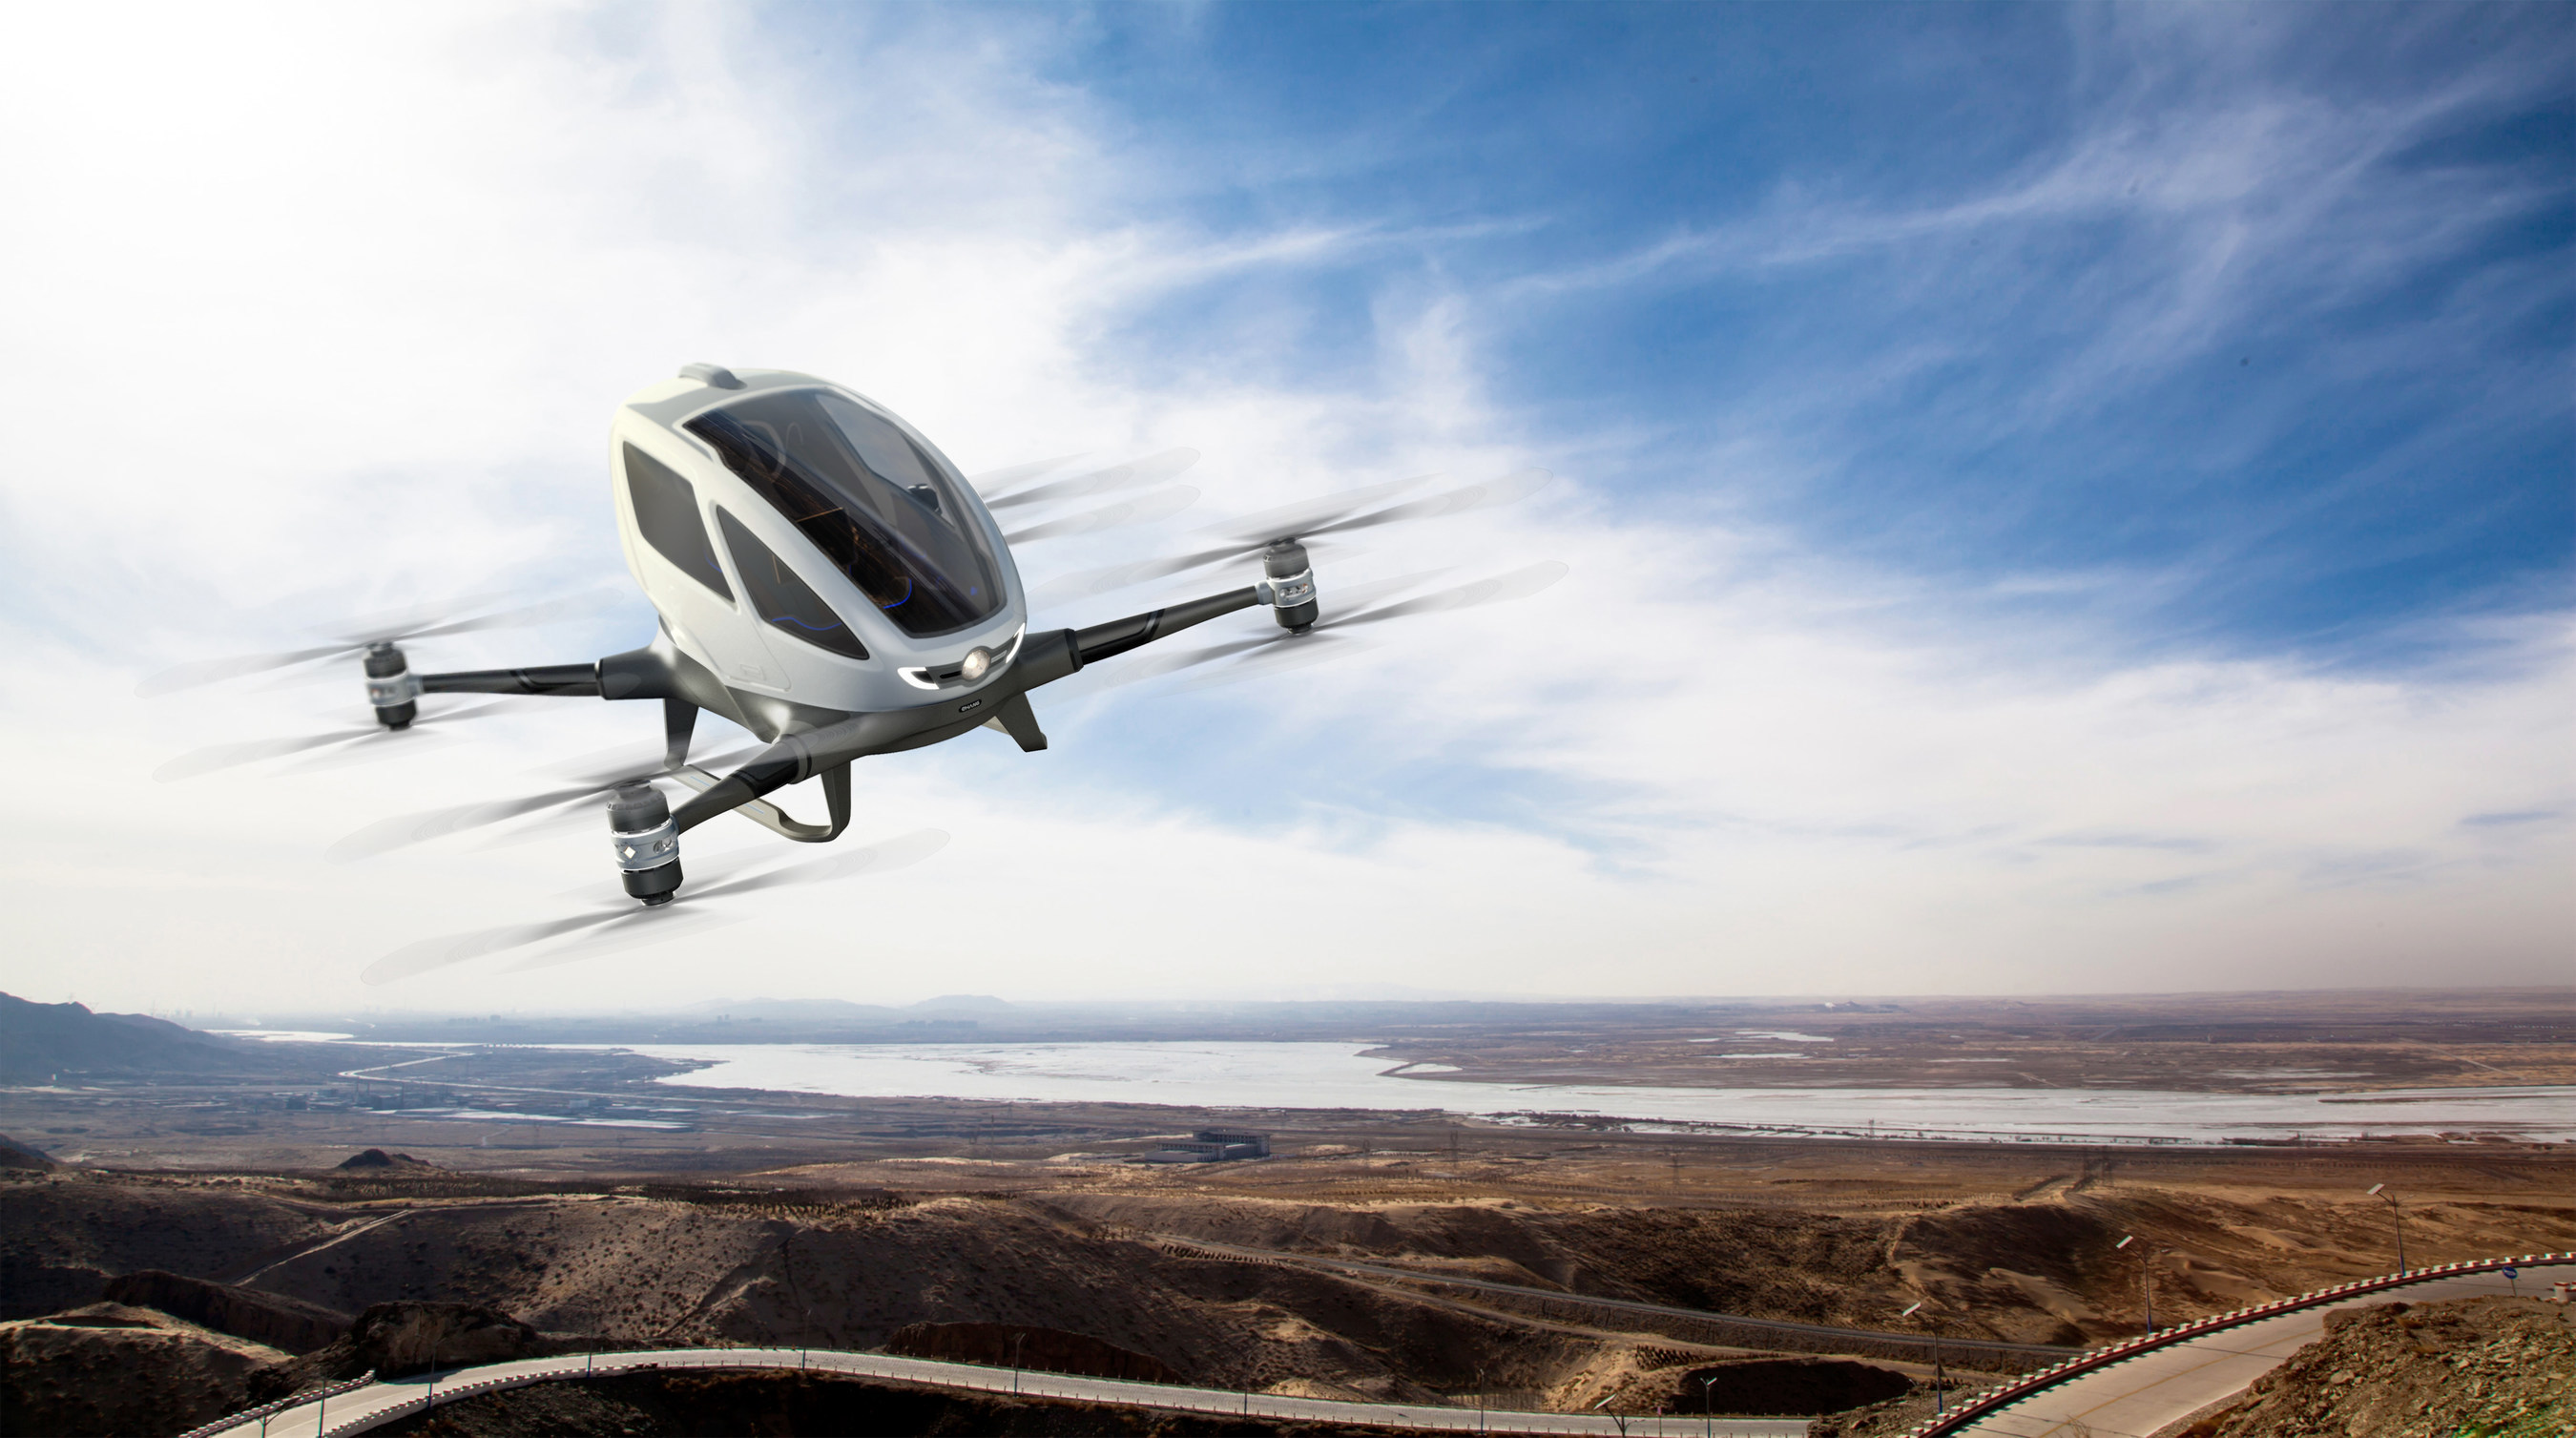 The world's first electric, personal Autonomous Aerial Vehicle (AAV) - EHang 184